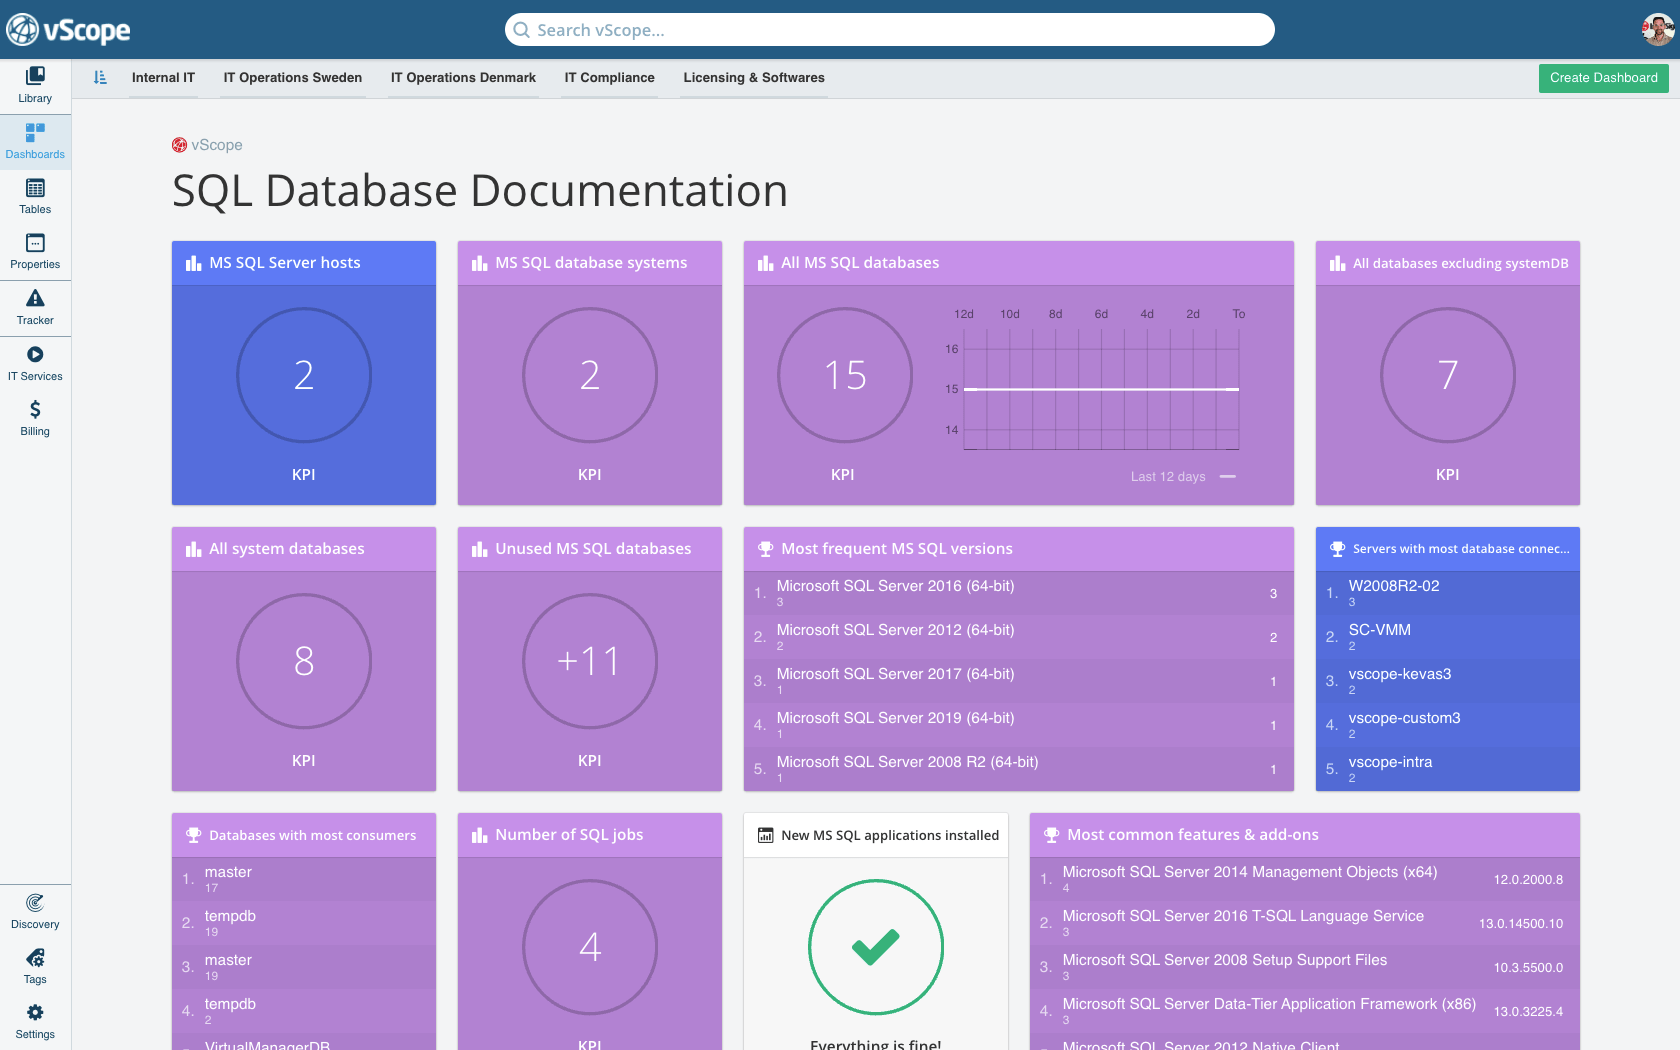 A Dashboard in vScope about Databases